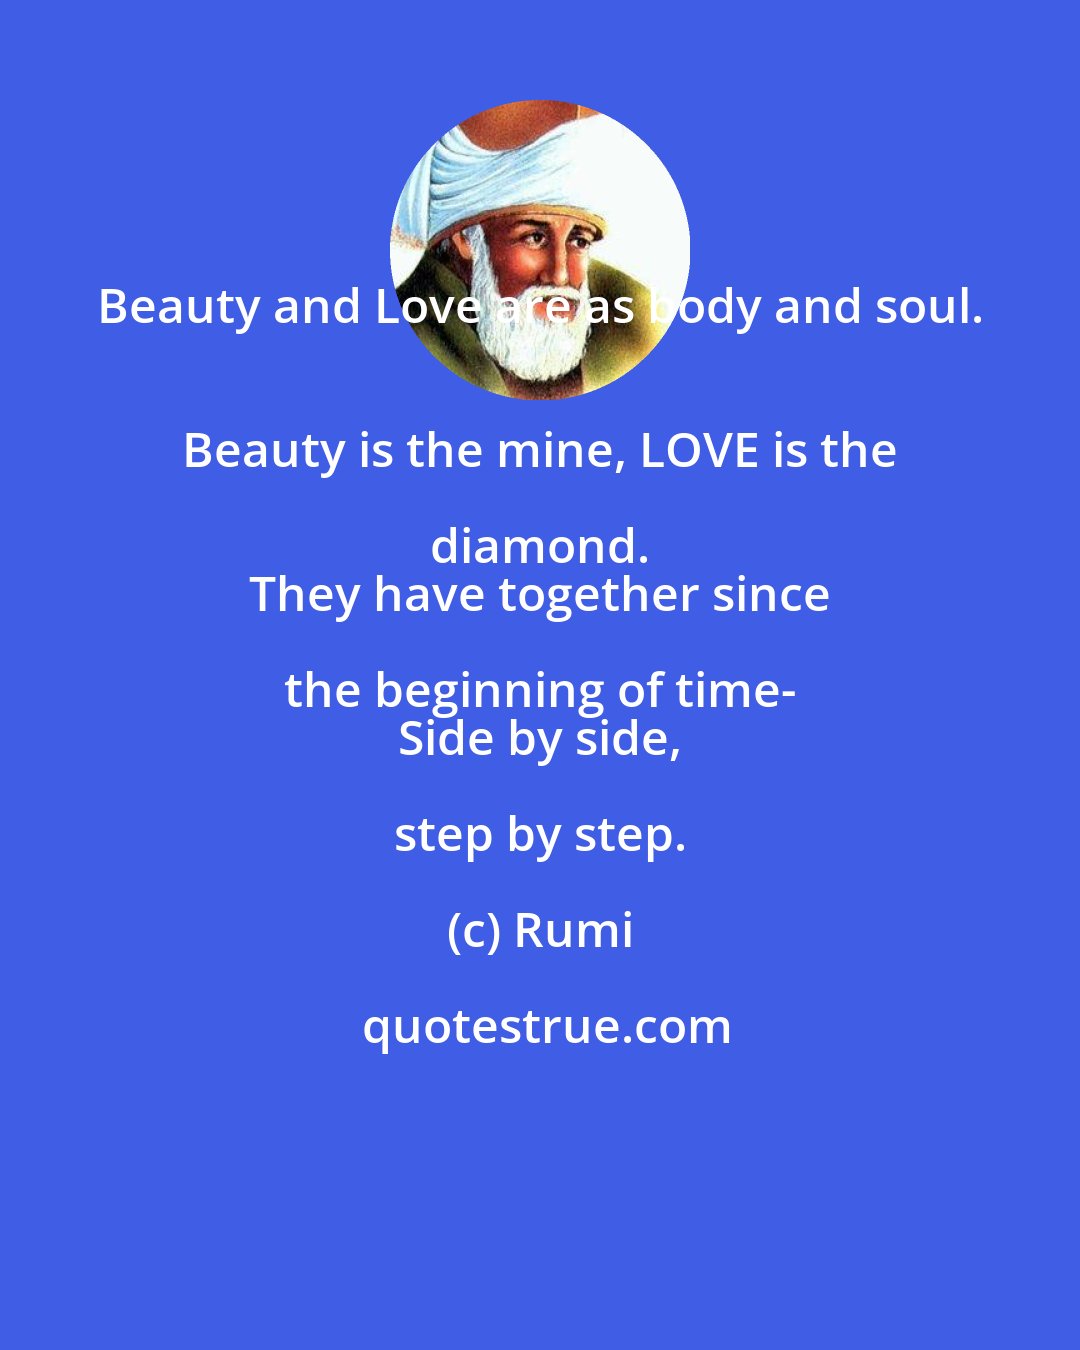 Rumi: Beauty and Love are as body and soul. 
 Beauty is the mine, LOVE is the diamond. 
 They have together since the beginning of time- 
 Side by side, step by step.